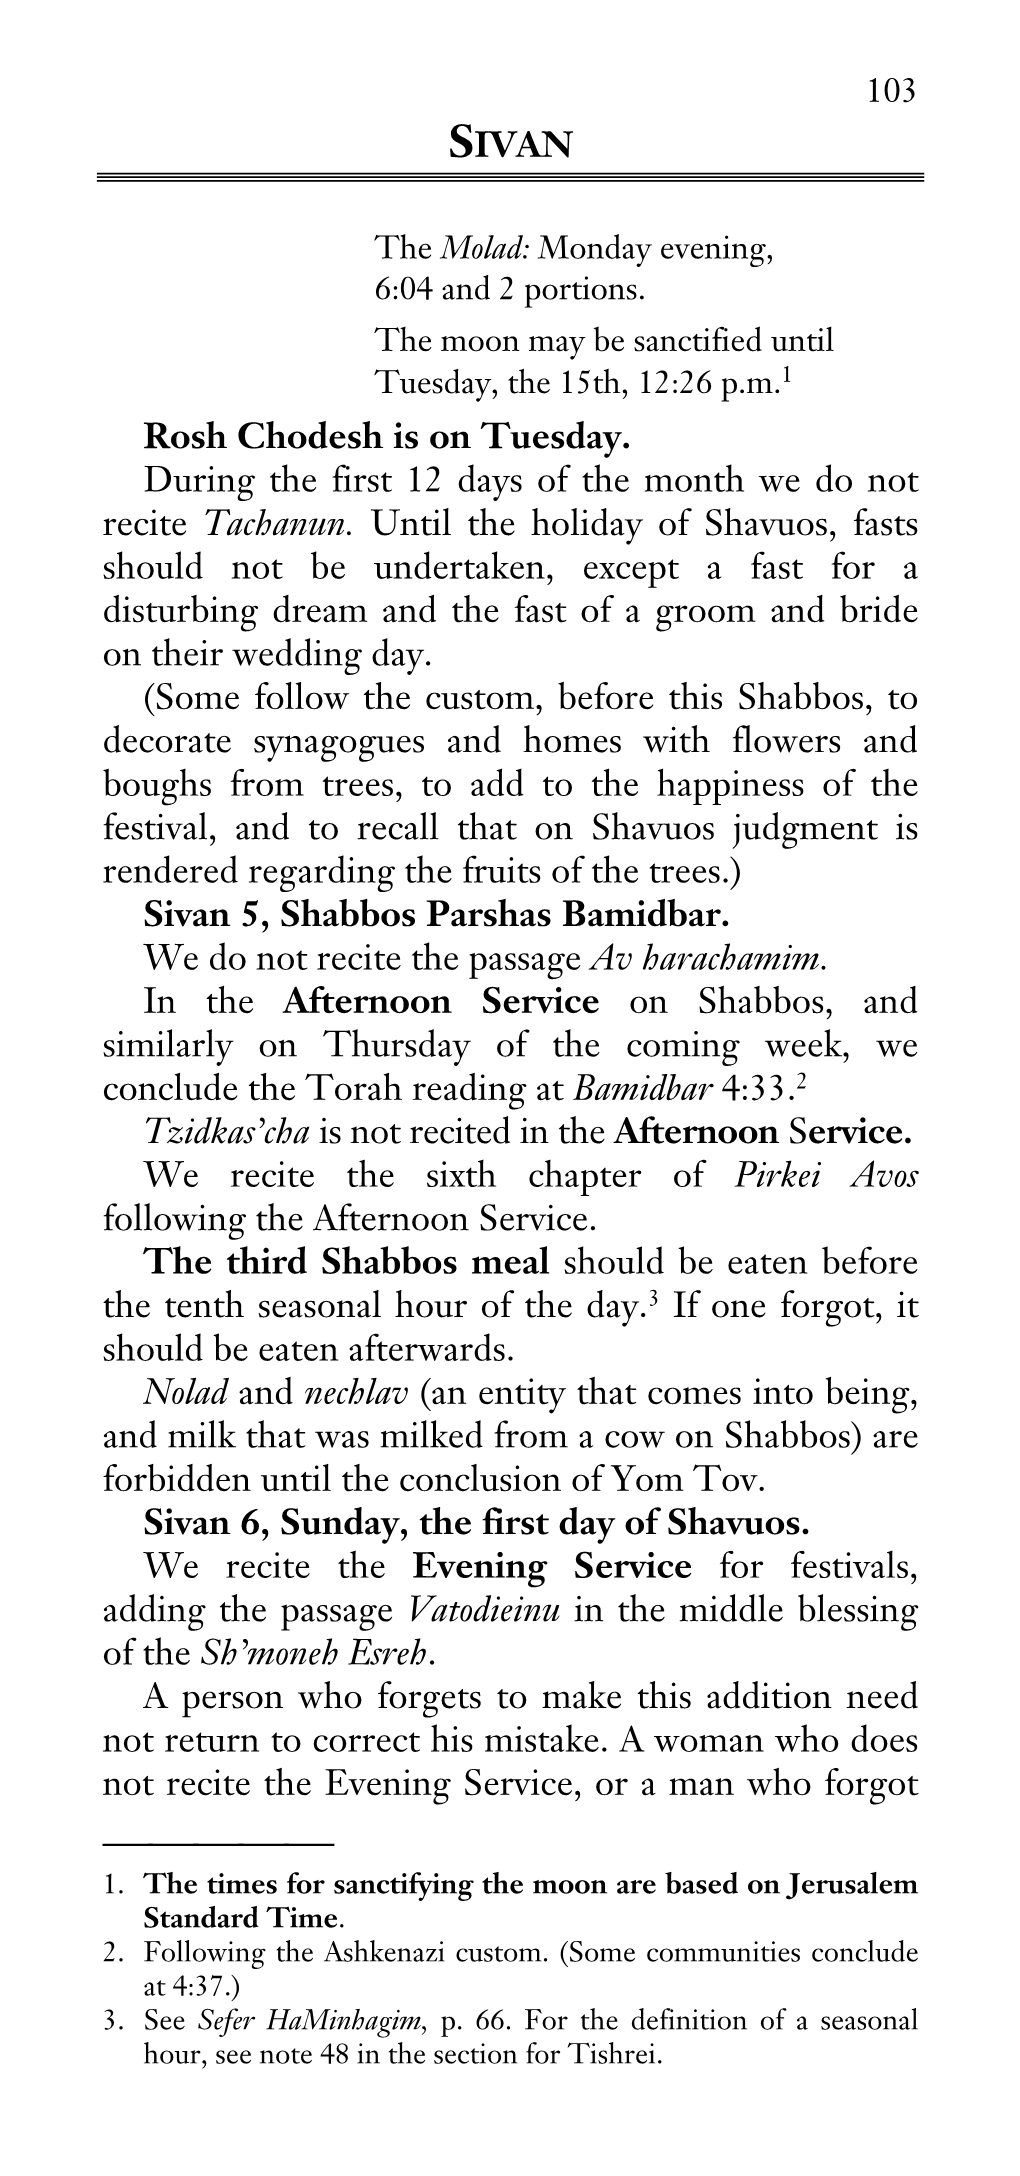 SIVAN Rosh Chodesh Is on Wednesday. During the First 12 Days of the Month, We Do Not Recite Tachanun. Until the Holiday of Shavu